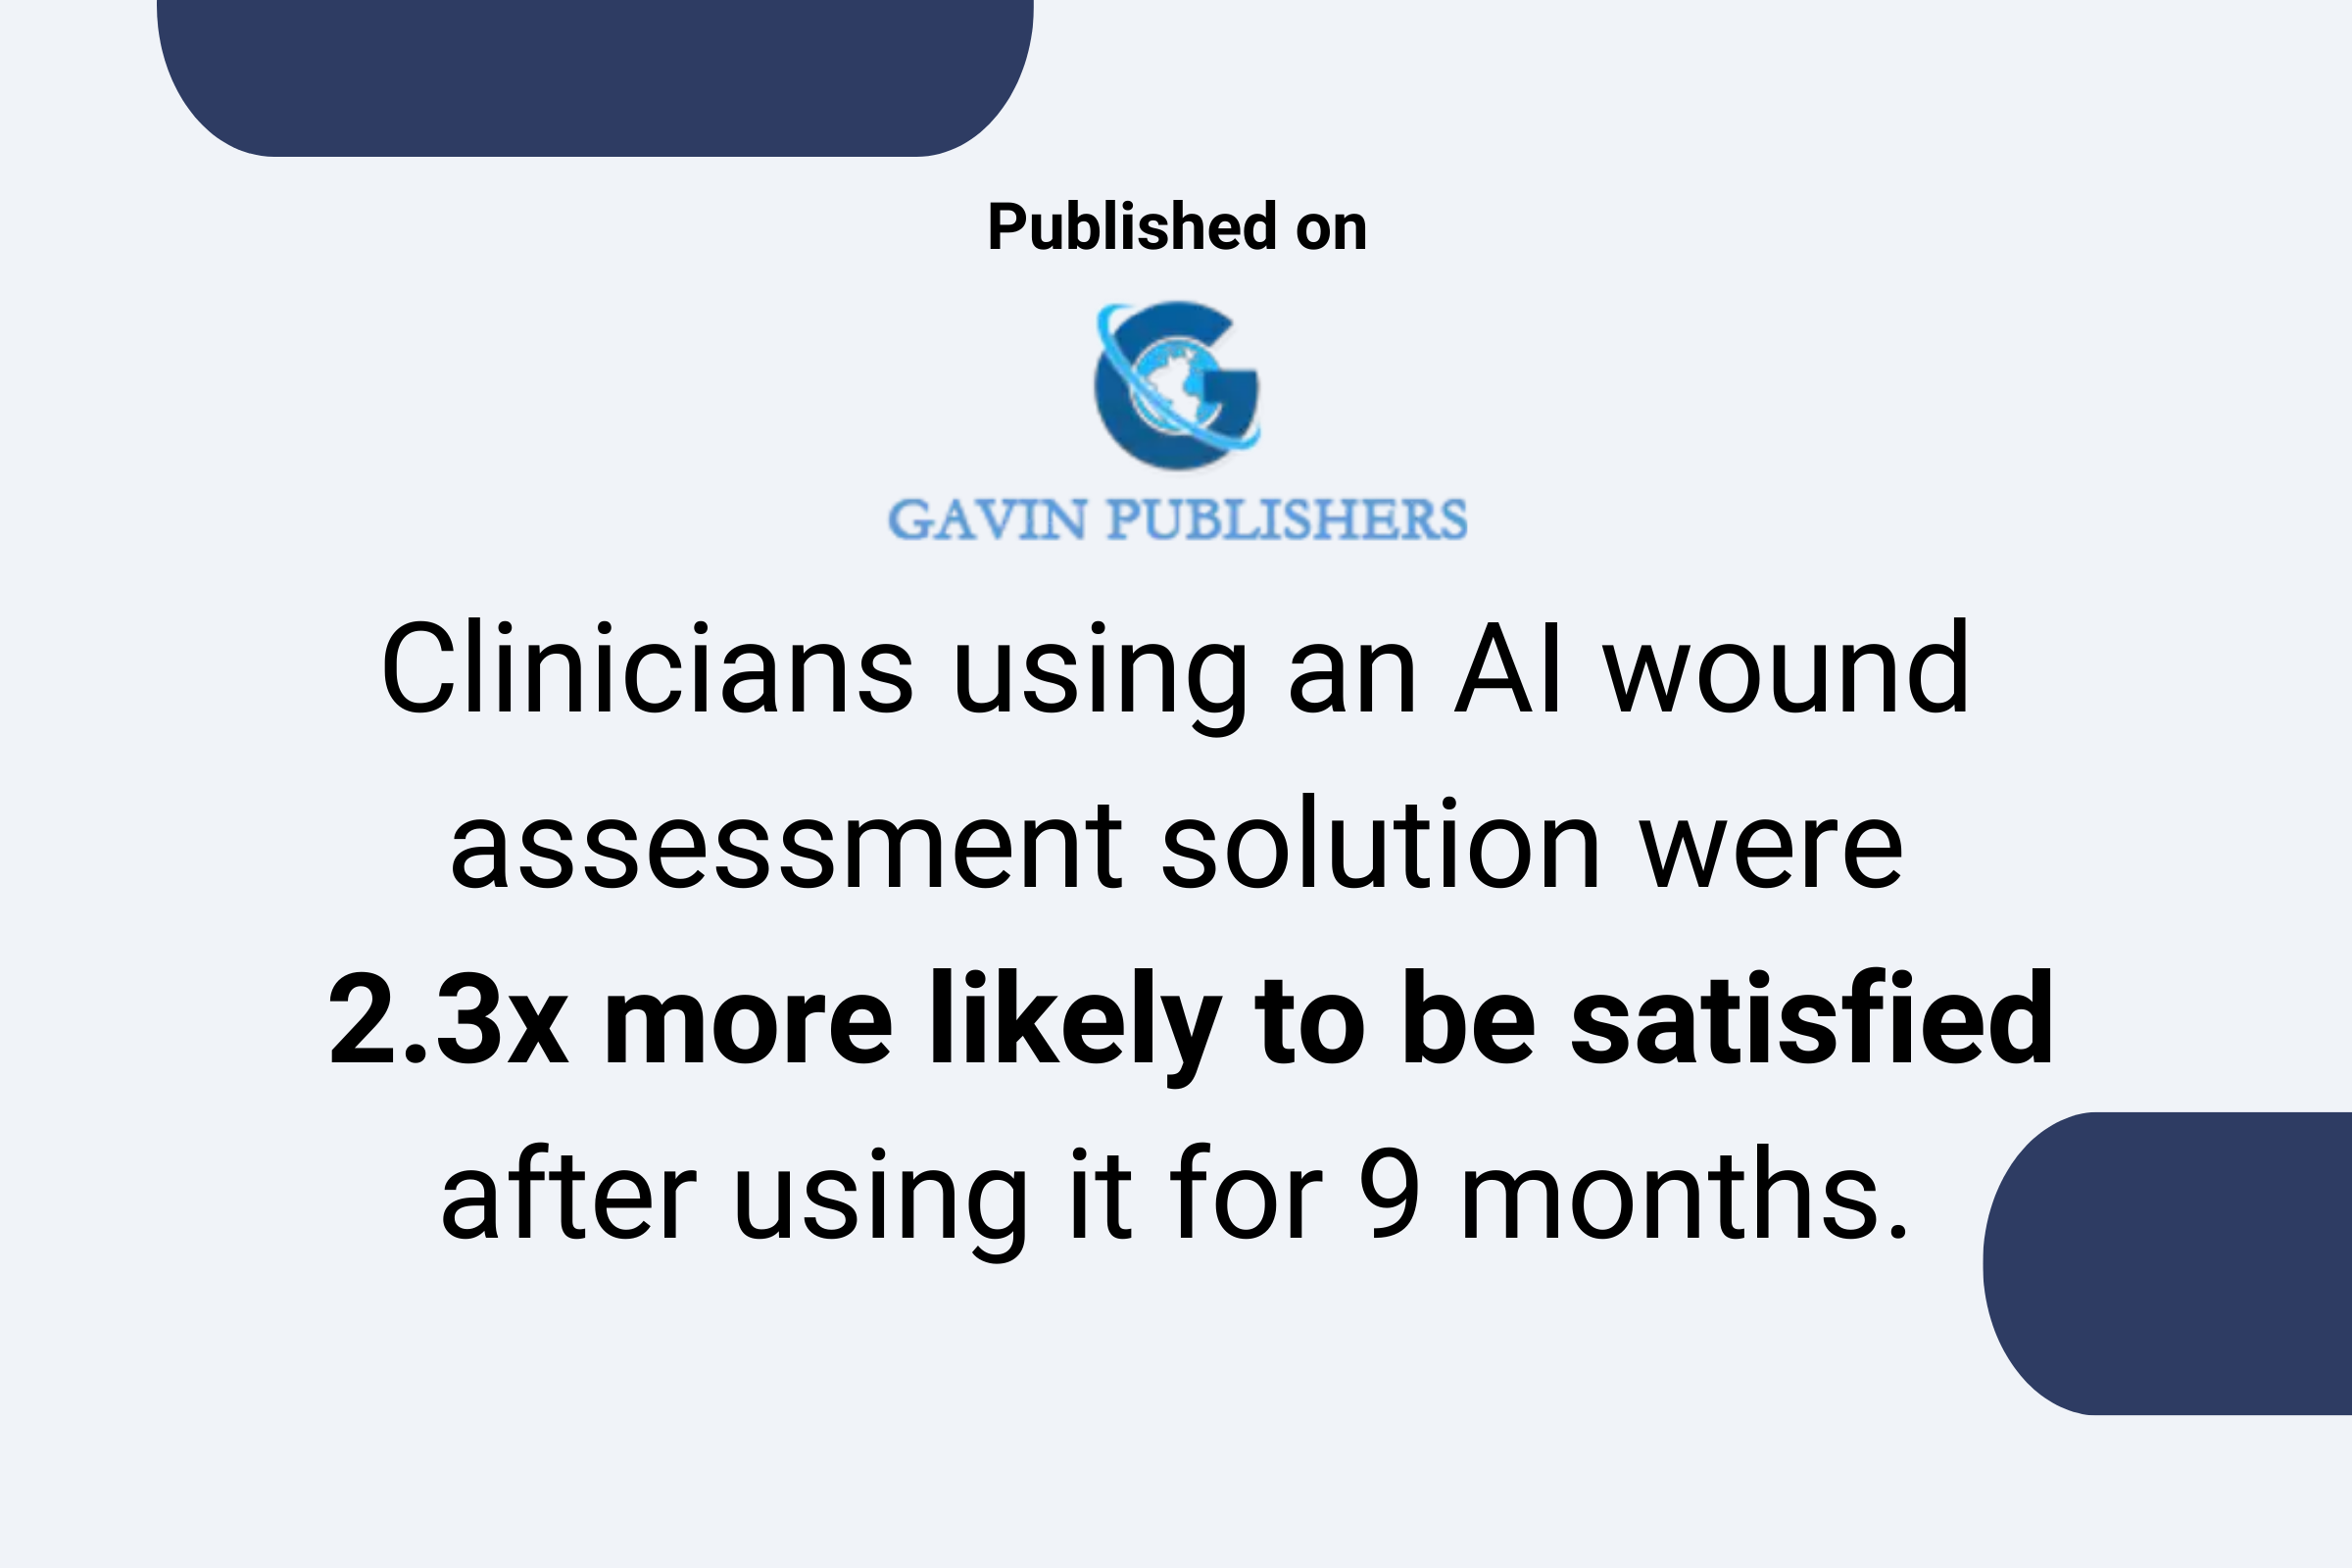 Published on Favin Publishers - “Clinicians using an AI wound assessment solution were 2.3x more likely to be satisfied after using it for 9 months.”